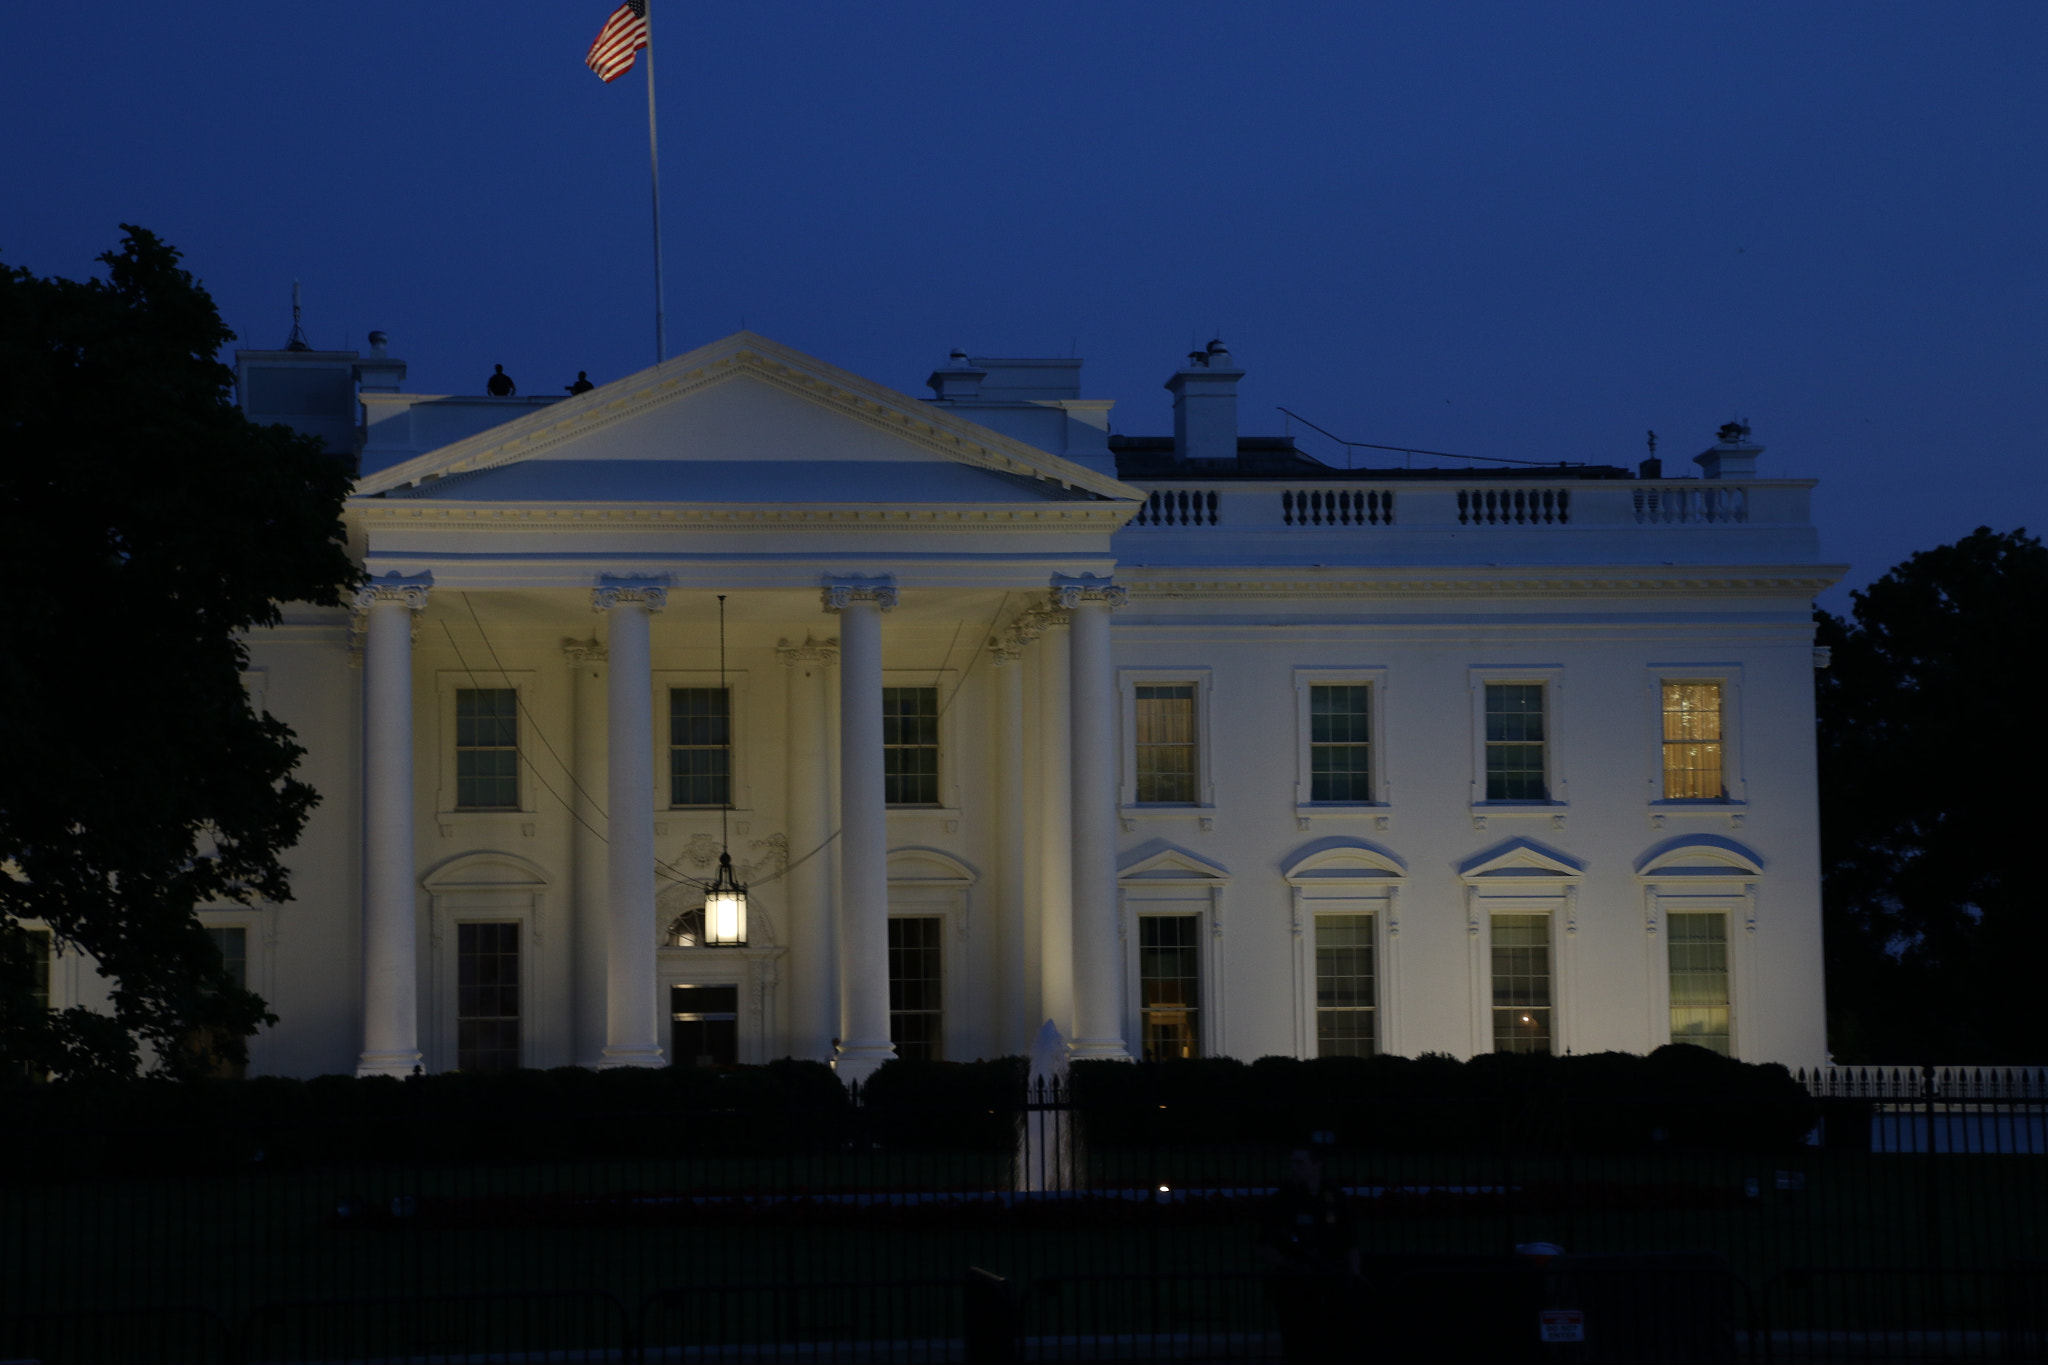 Canon EOS 7D Mark II + Tamron 16-300mm F3.5-6.3 Di II VC PZD Macro sample photo. White house at dusk, may 2018 photography